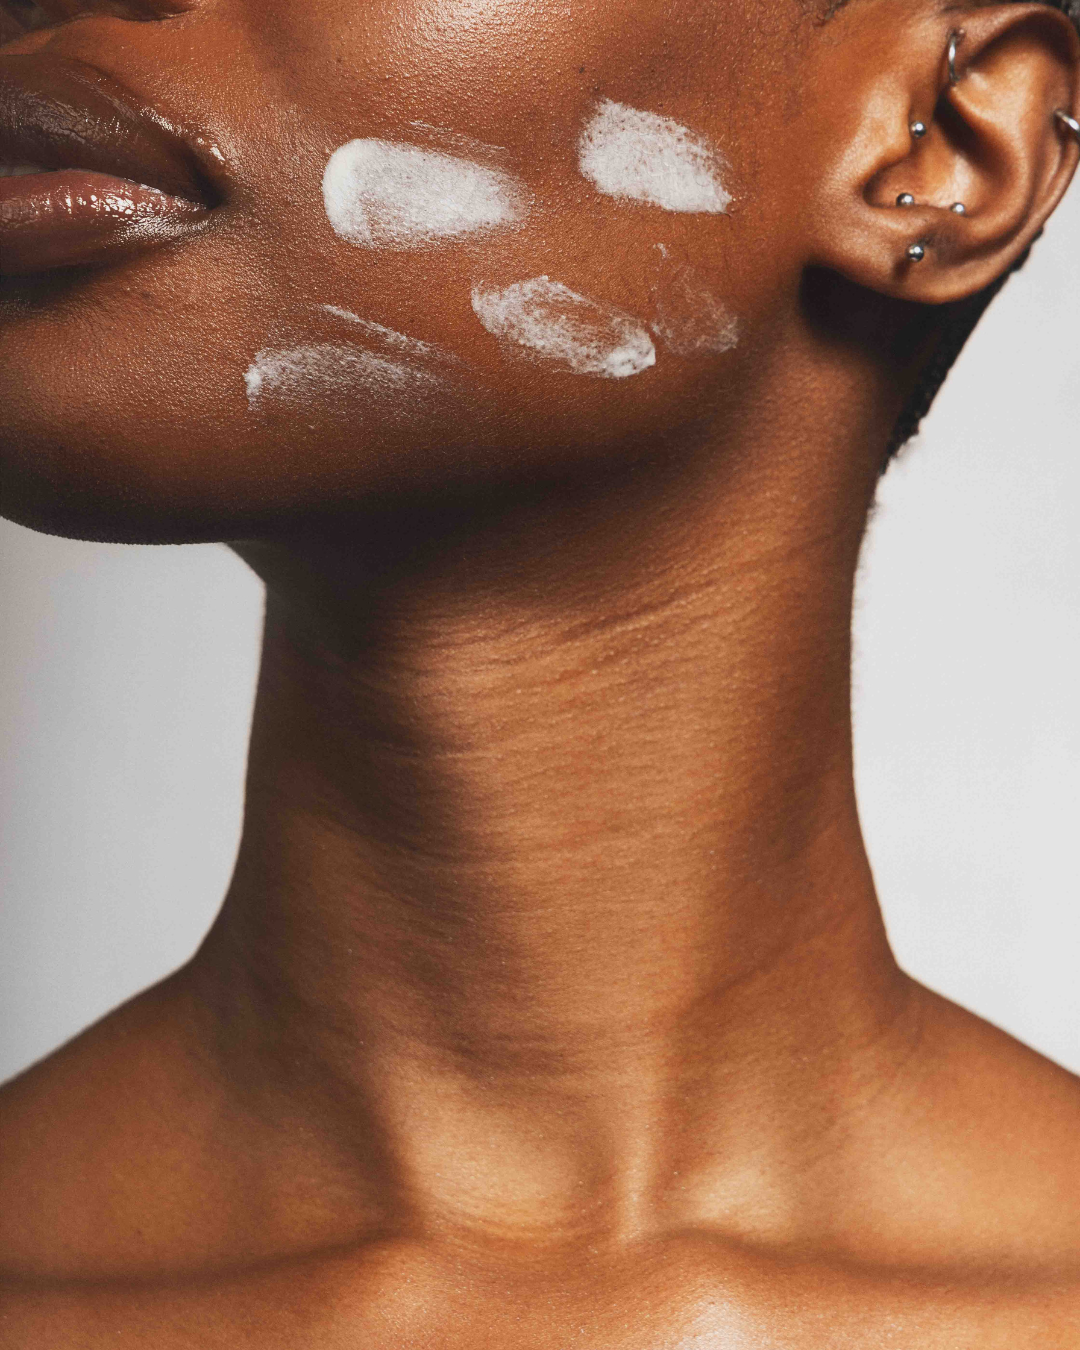 Close-up of model's face and neck with cream applied on her cheek.